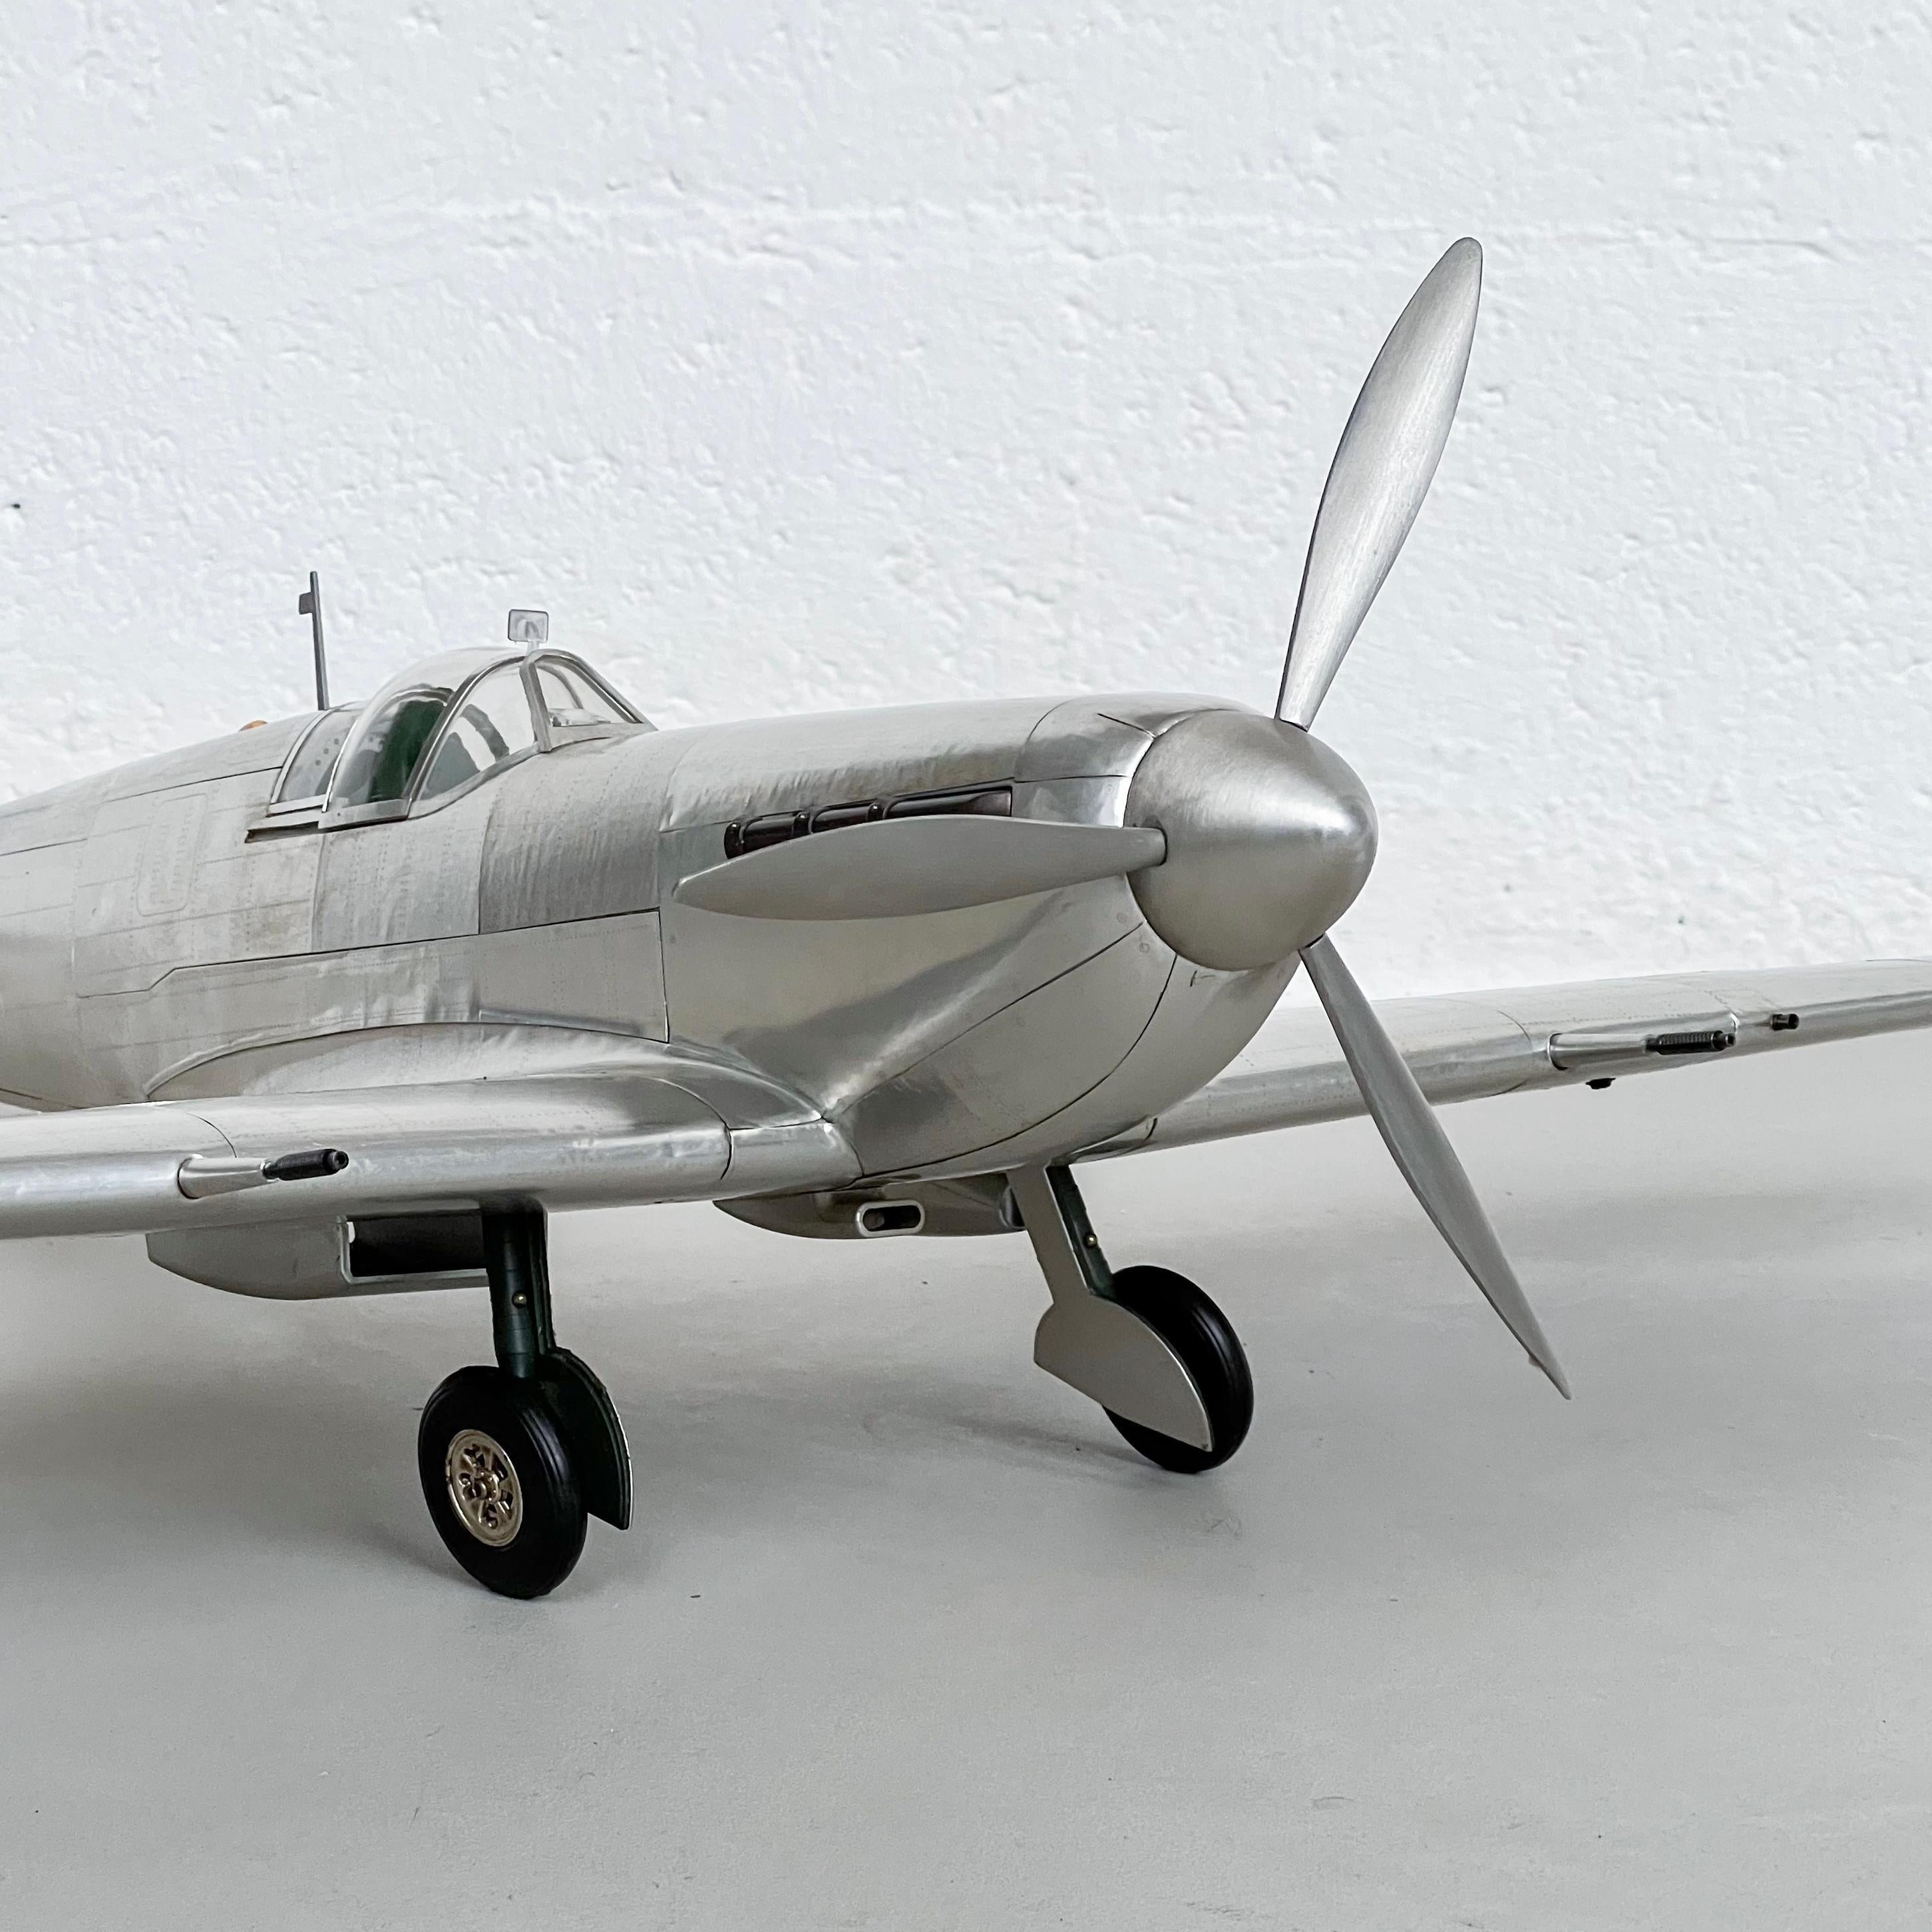 Italian Supermarine Spitfire Airplane Decorative Scale Model, Big Size, Highly Detailed For Sale